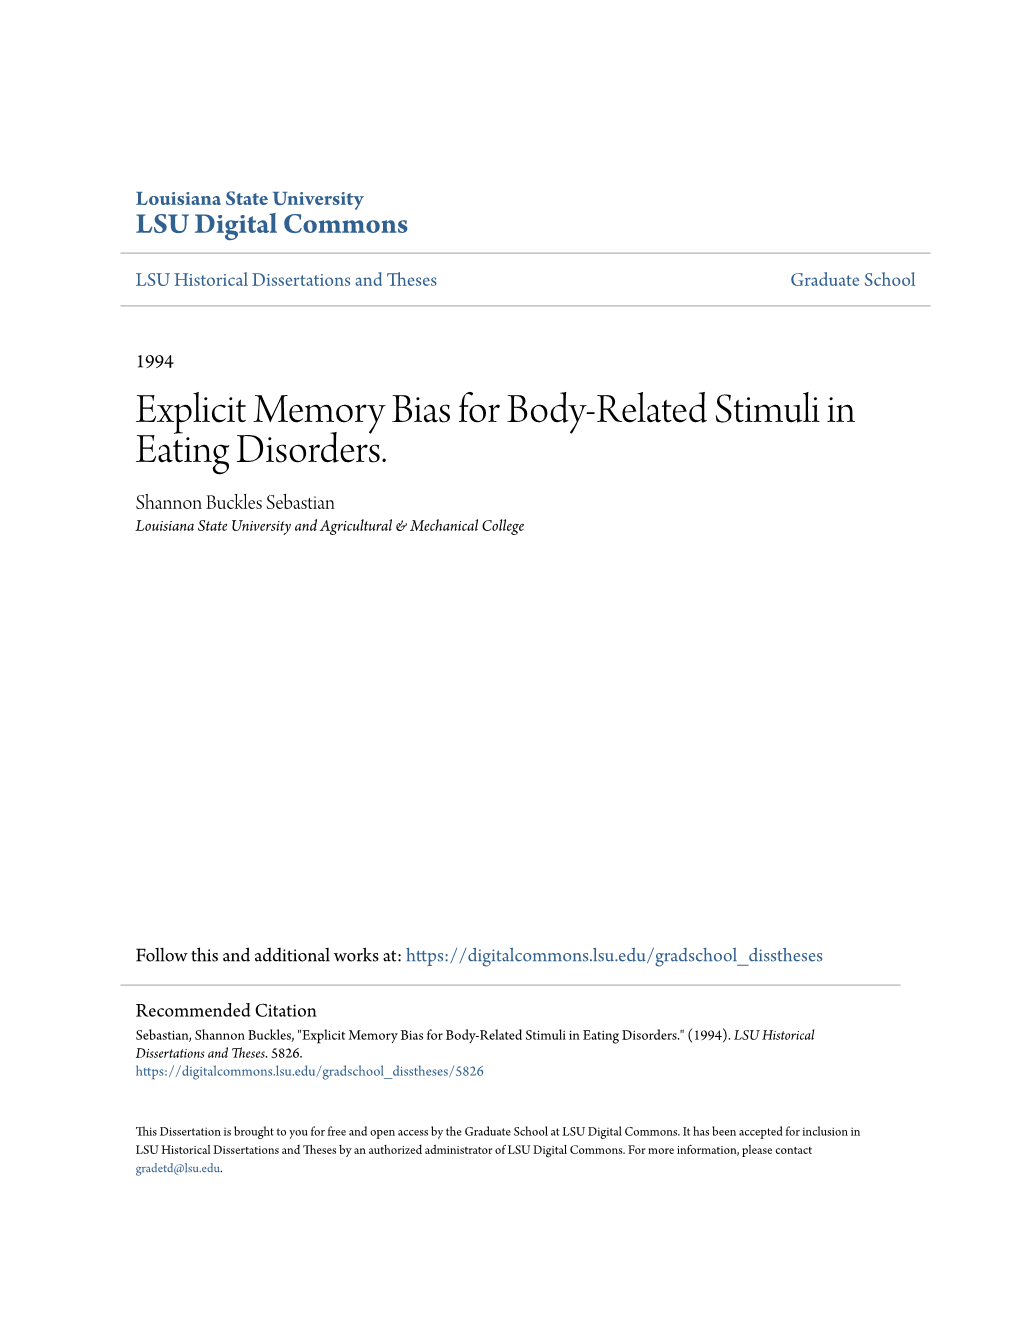 Explicit Memory Bias for Body-Related Stimuli in Eating Disorders